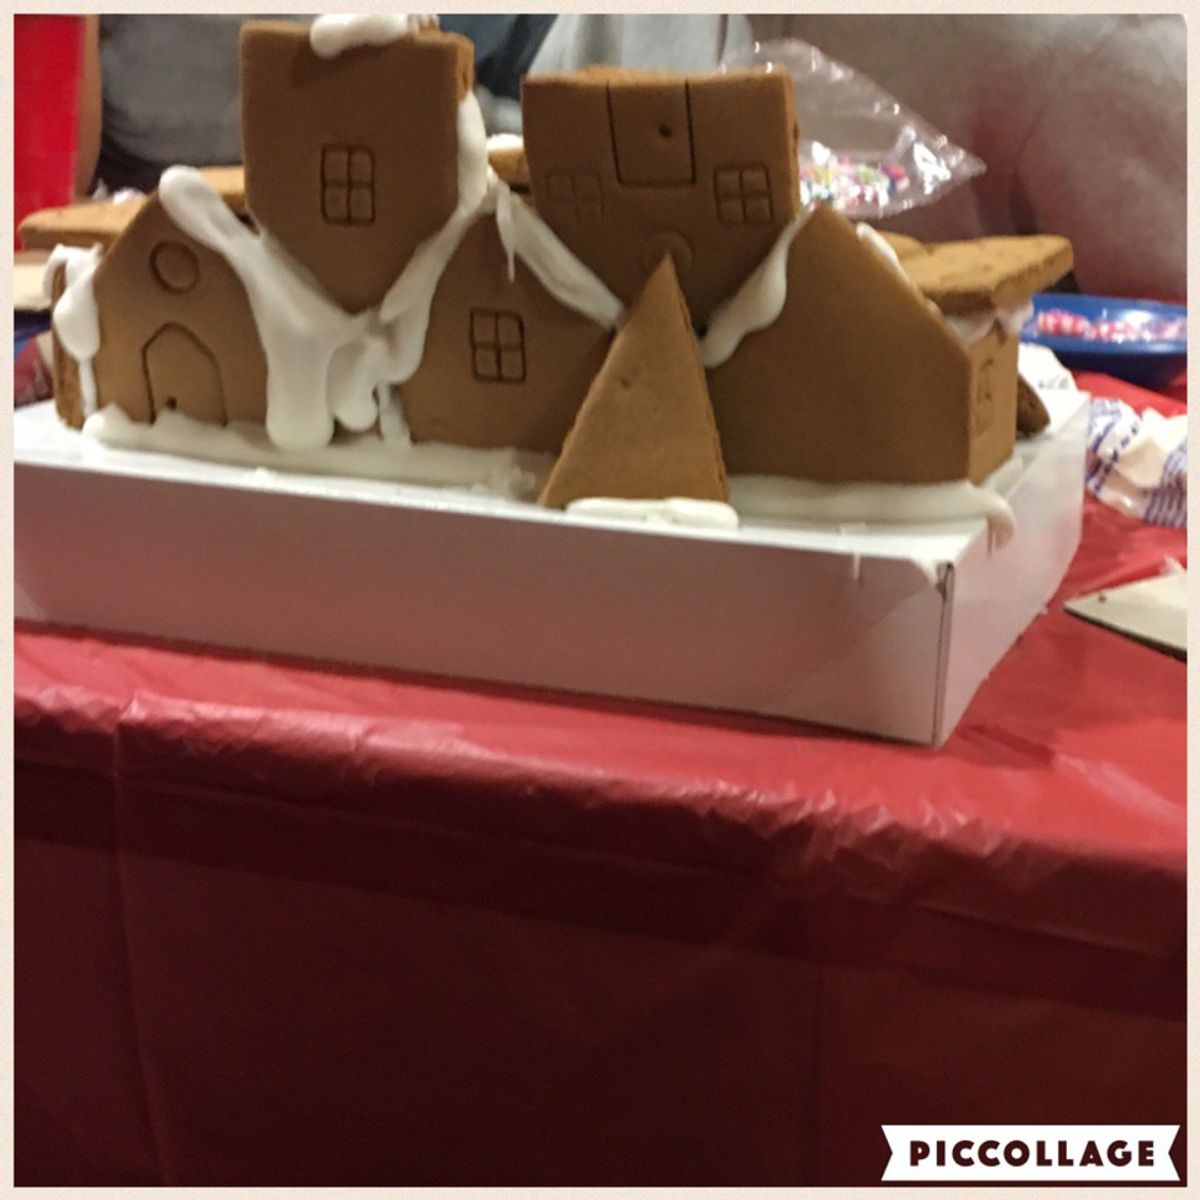 College As Parts of A Gingerbread House